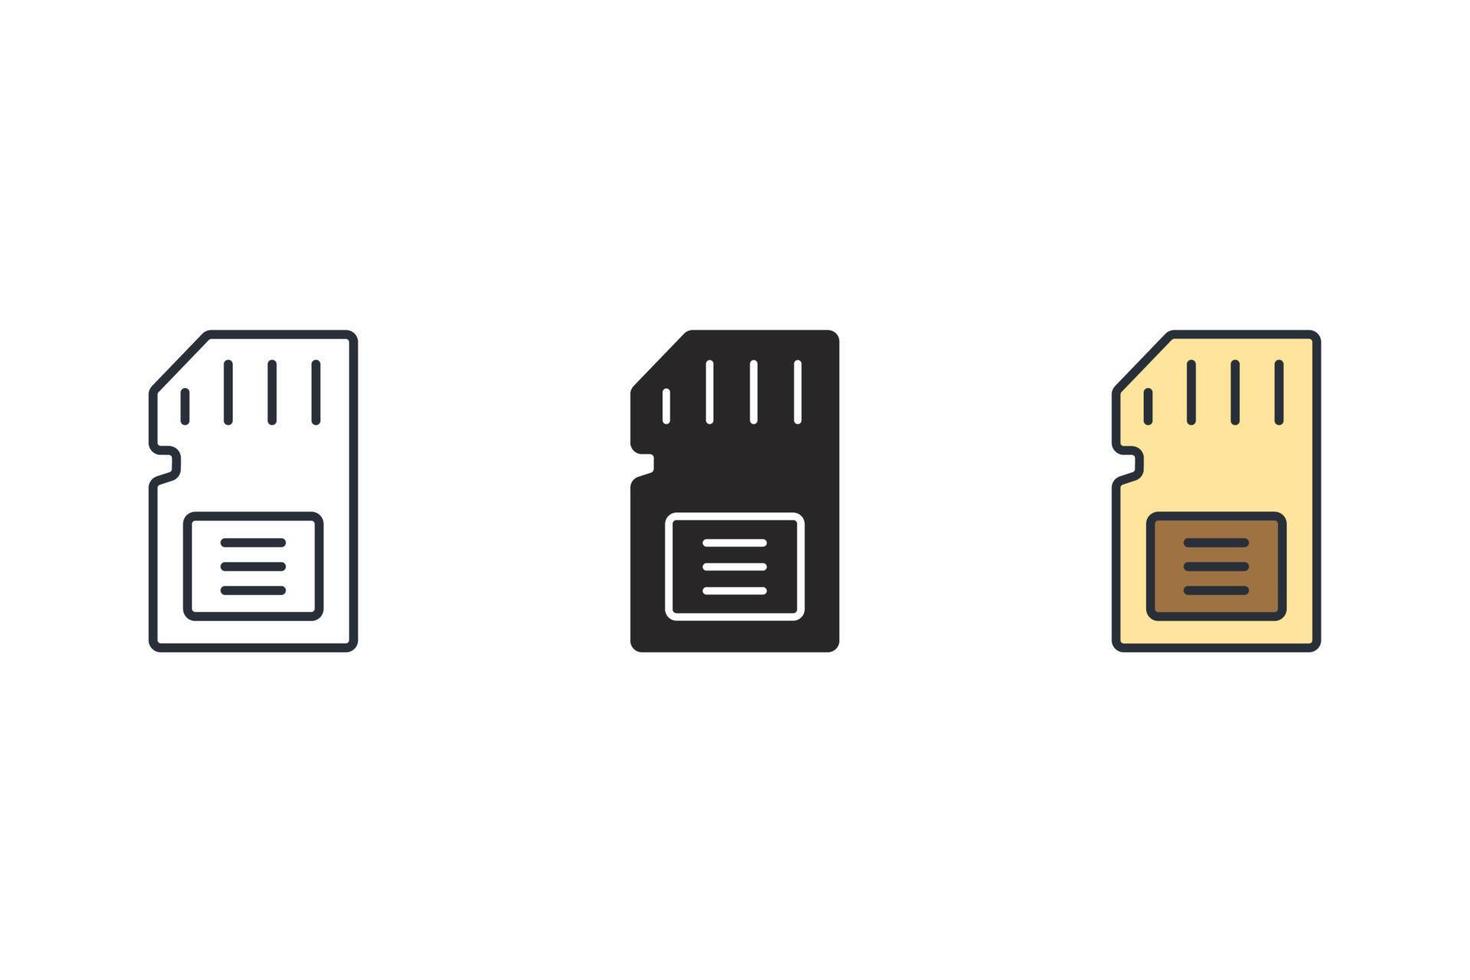 Memory card icons symbol vector elements for infographic web